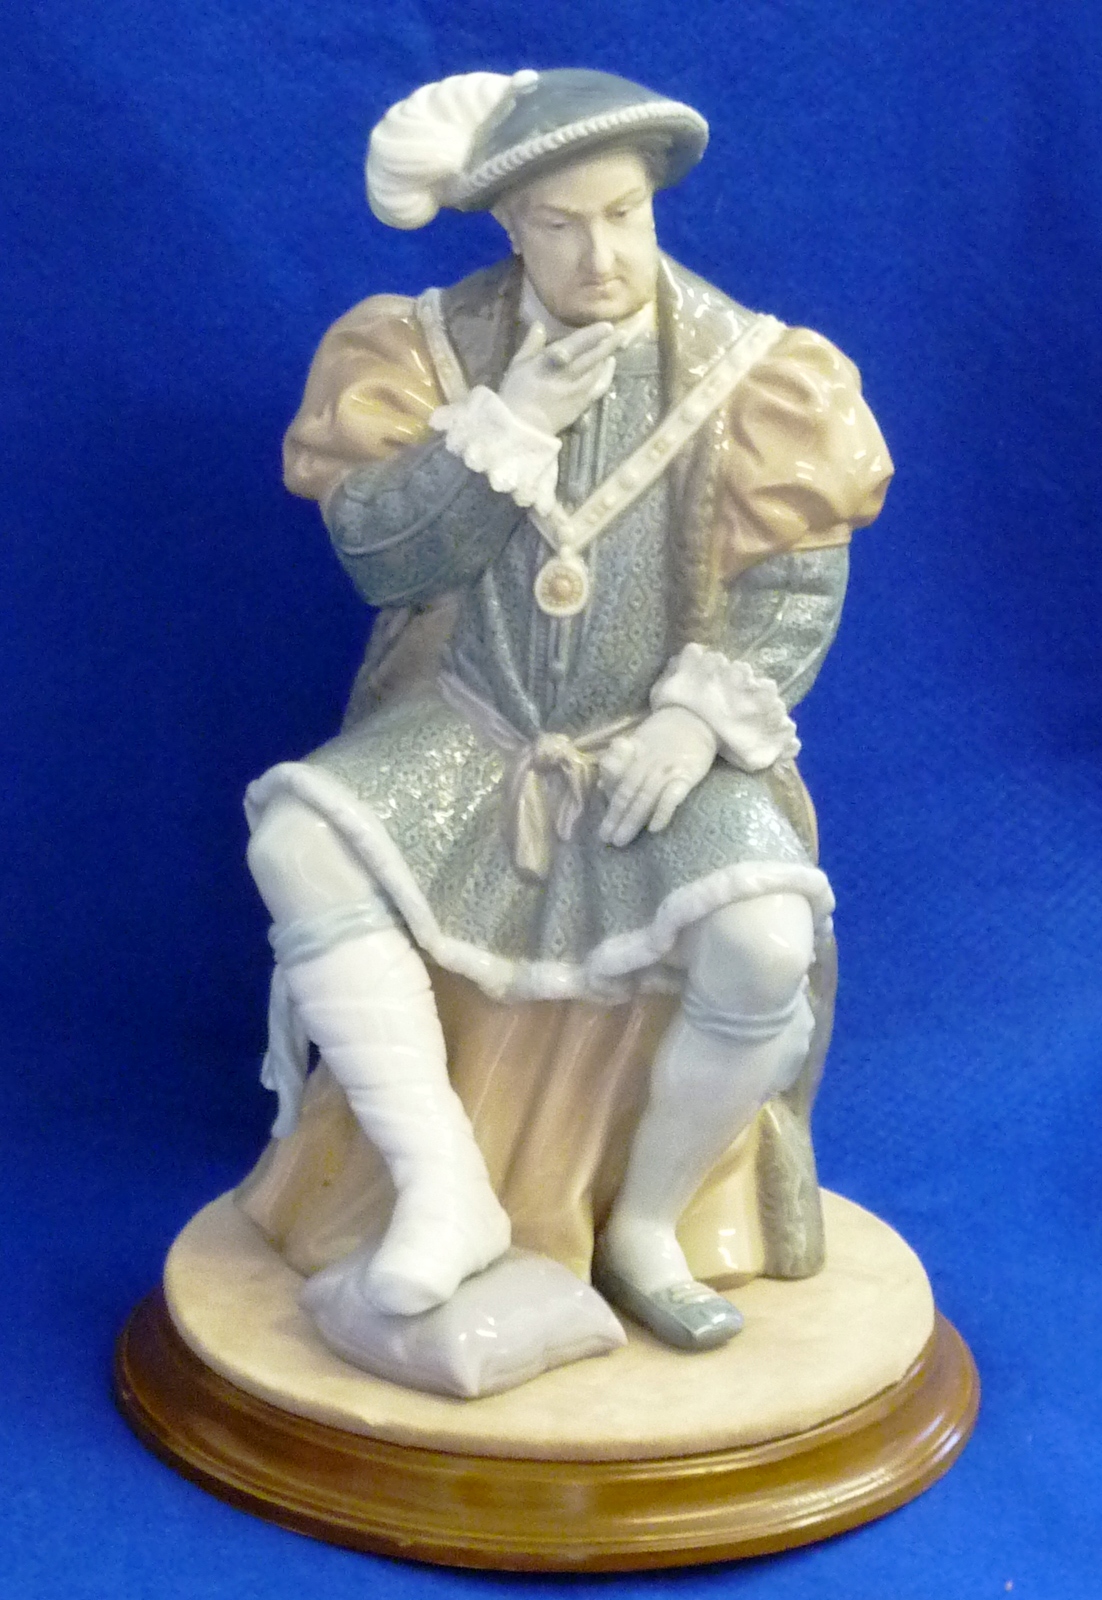 A Lladro Figure of King Henry VIII sitting on a cushioned stool in court dress, decorated in typical